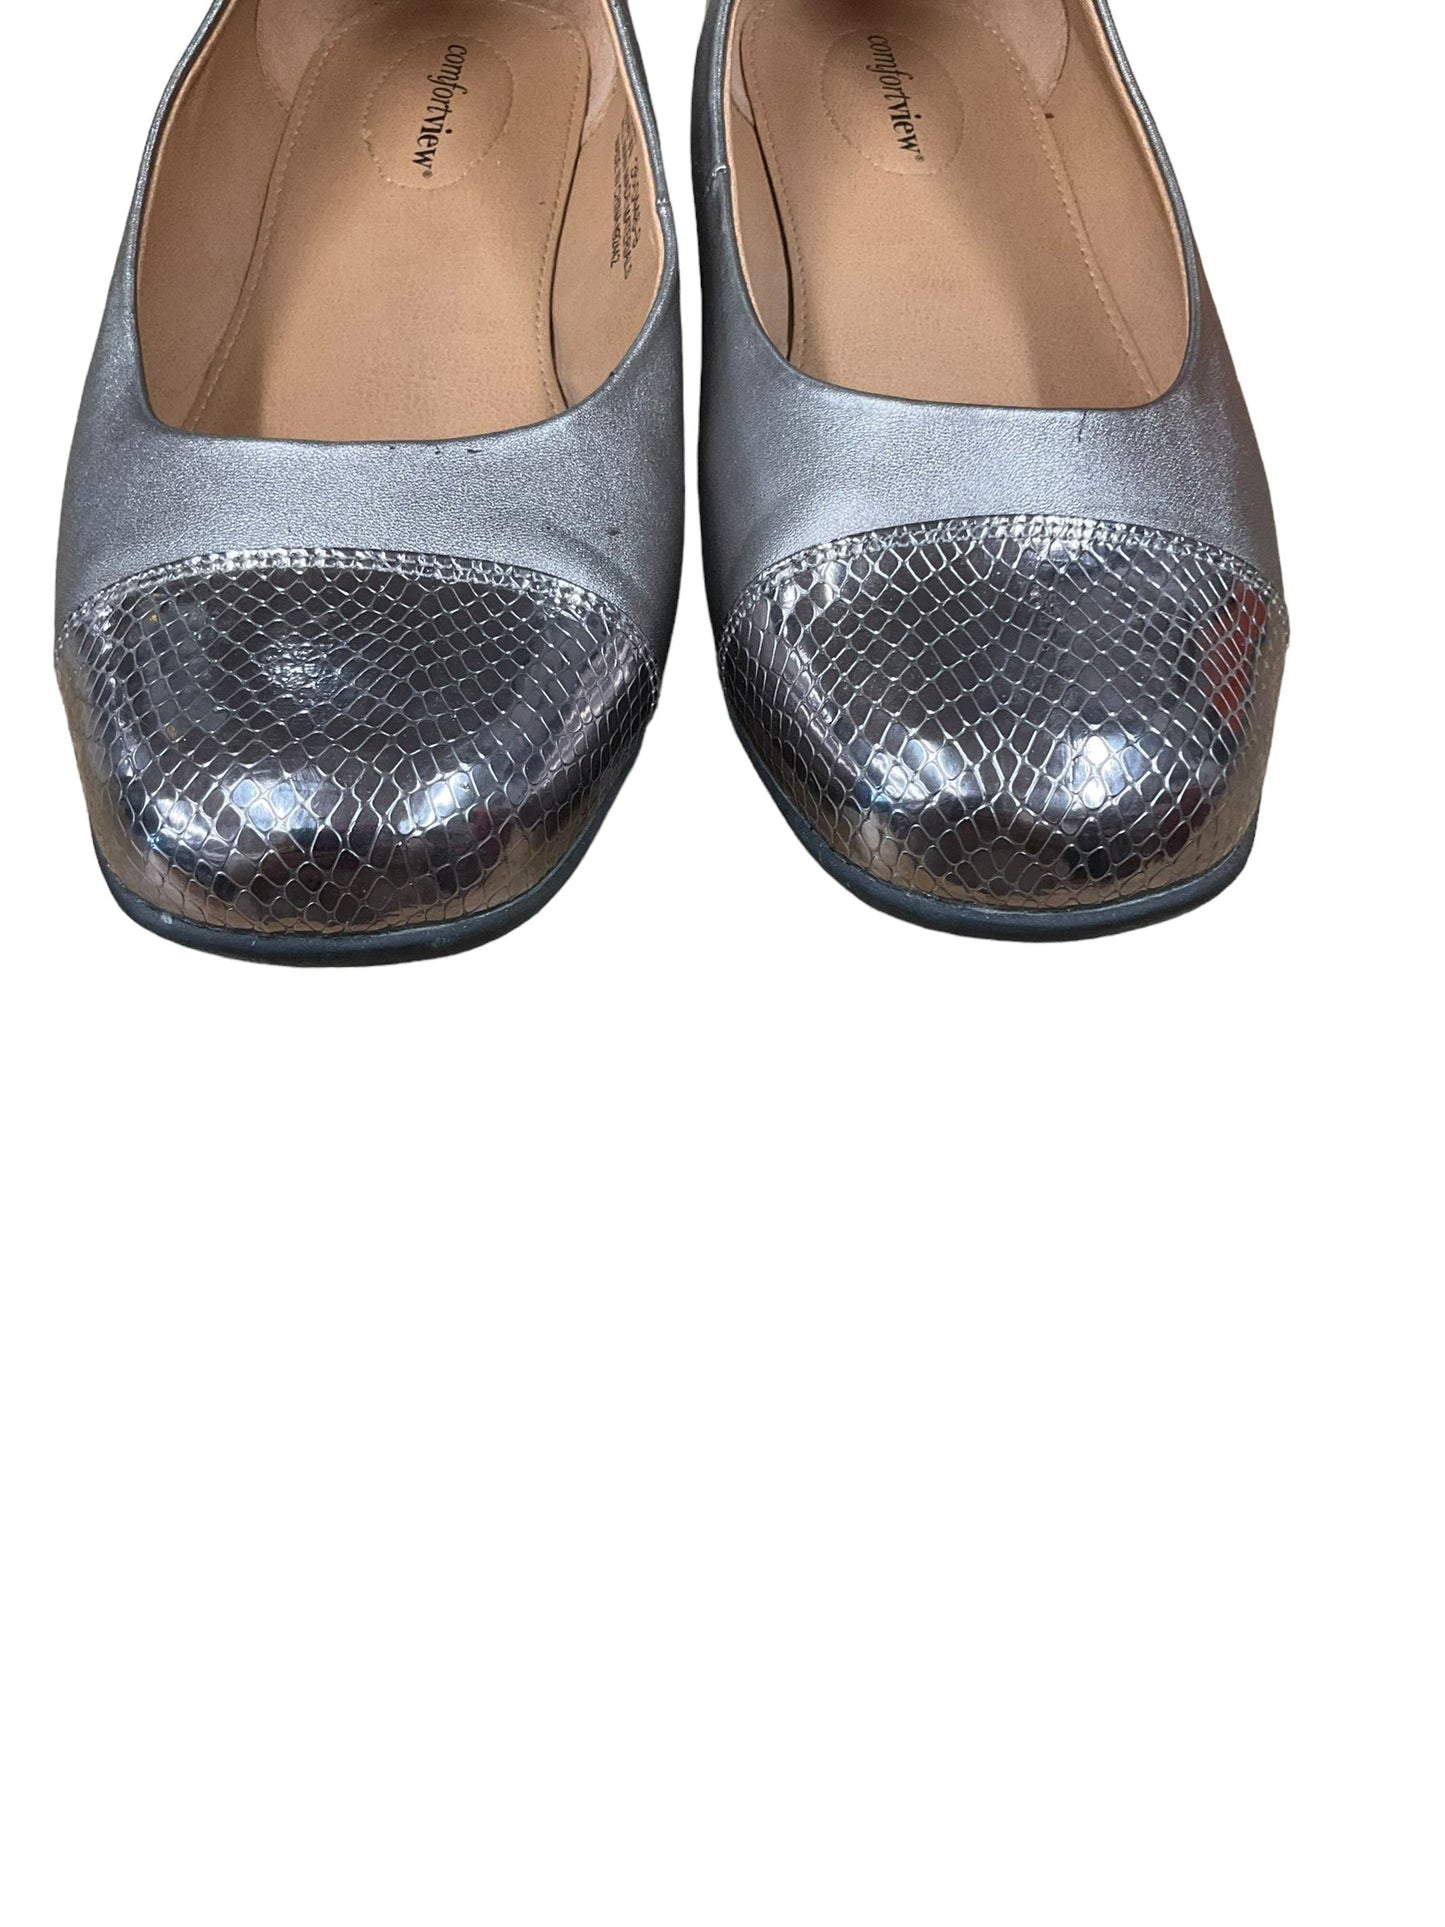 Silver Shoes Flats Comfortview, Size 10